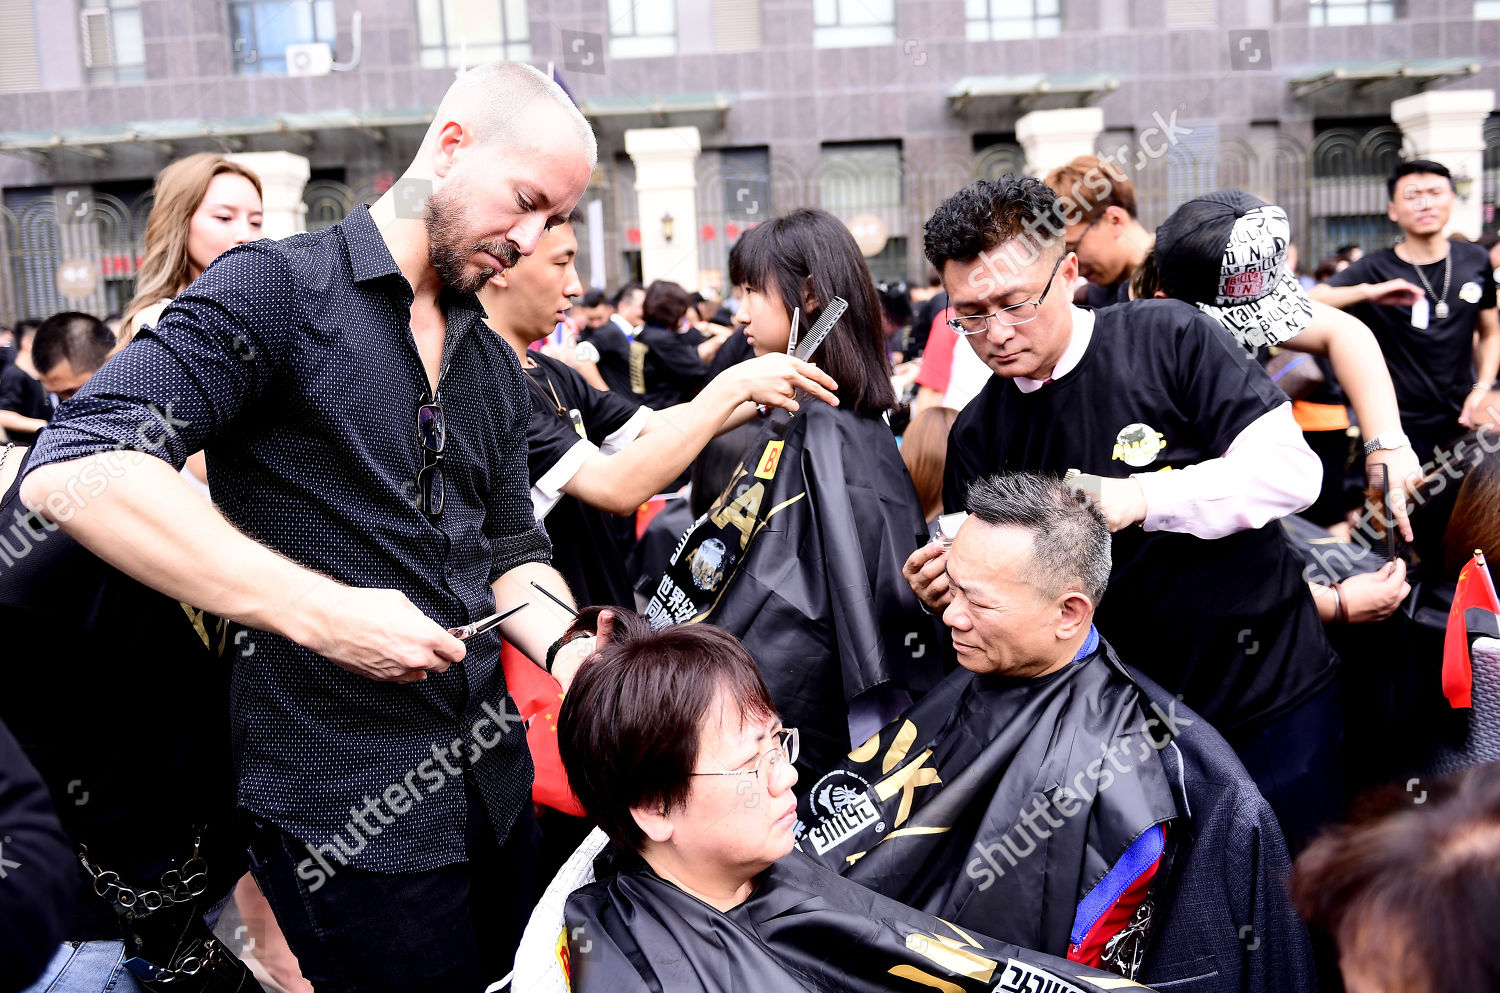 1400 Hairdressers Simultaneously Cut Hair Redaktionelles Stockfoto